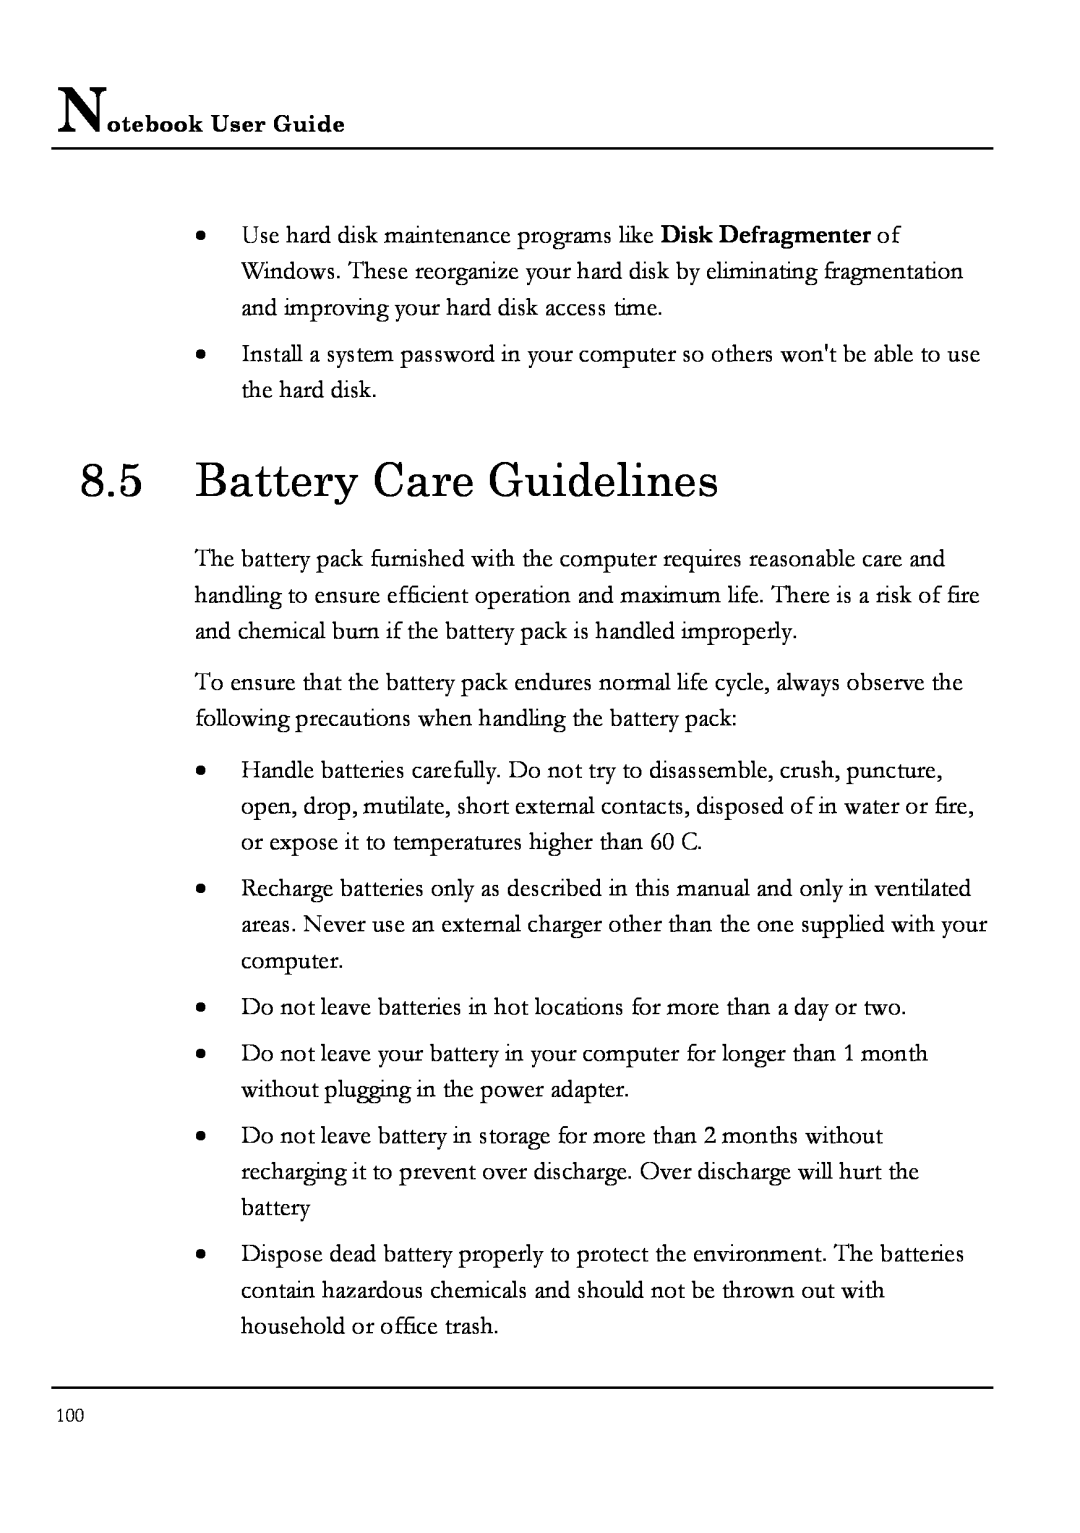 Everex NM4100W, NM3700W, NM3500W, NM3900W manual Battery Care Guidelines 